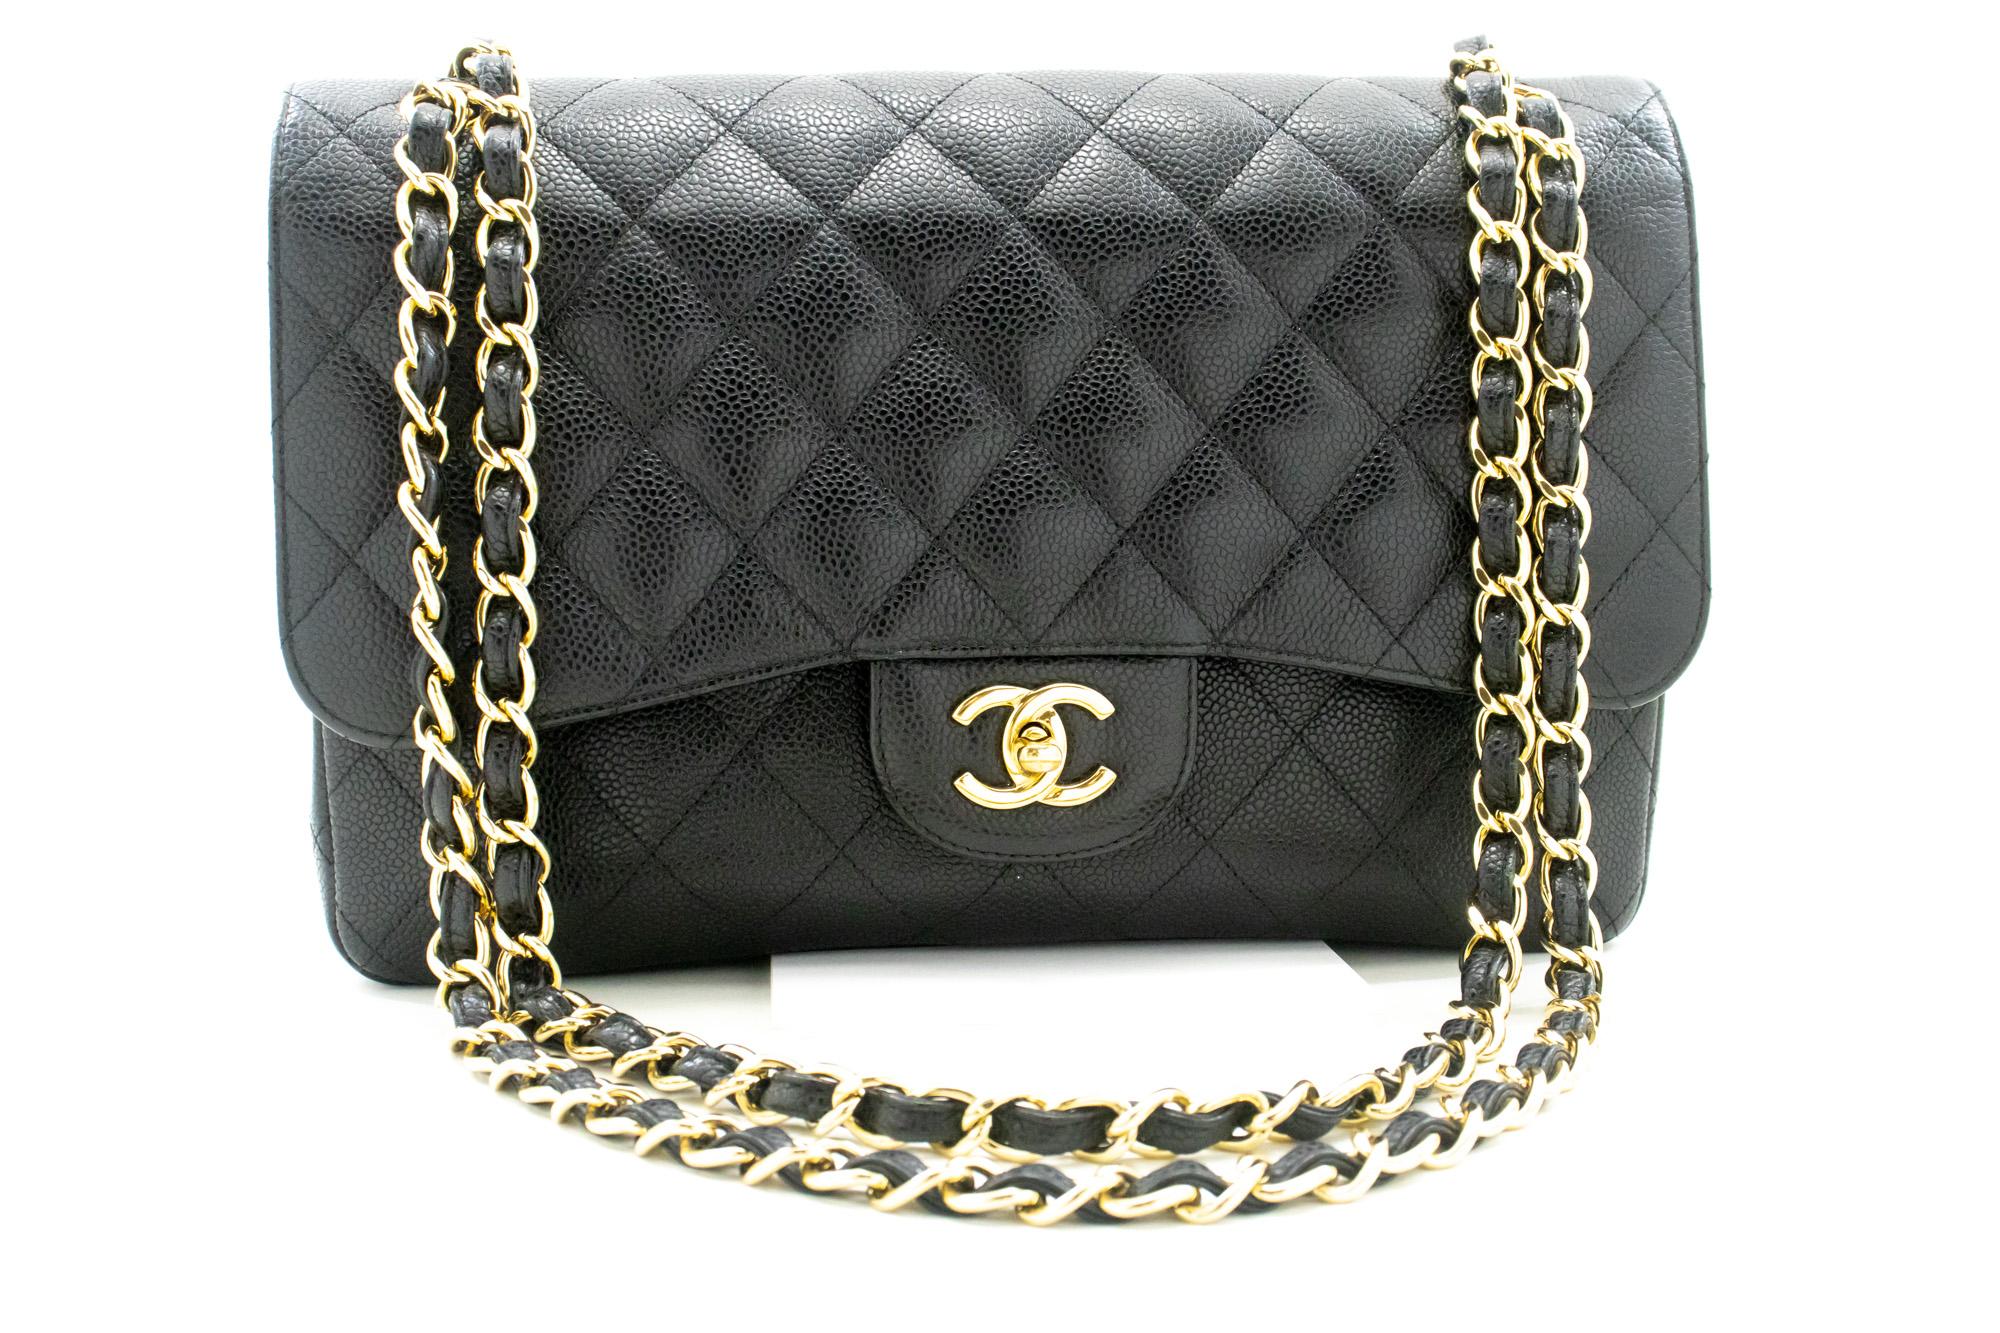 An authentic CHANEL Classic Large 11